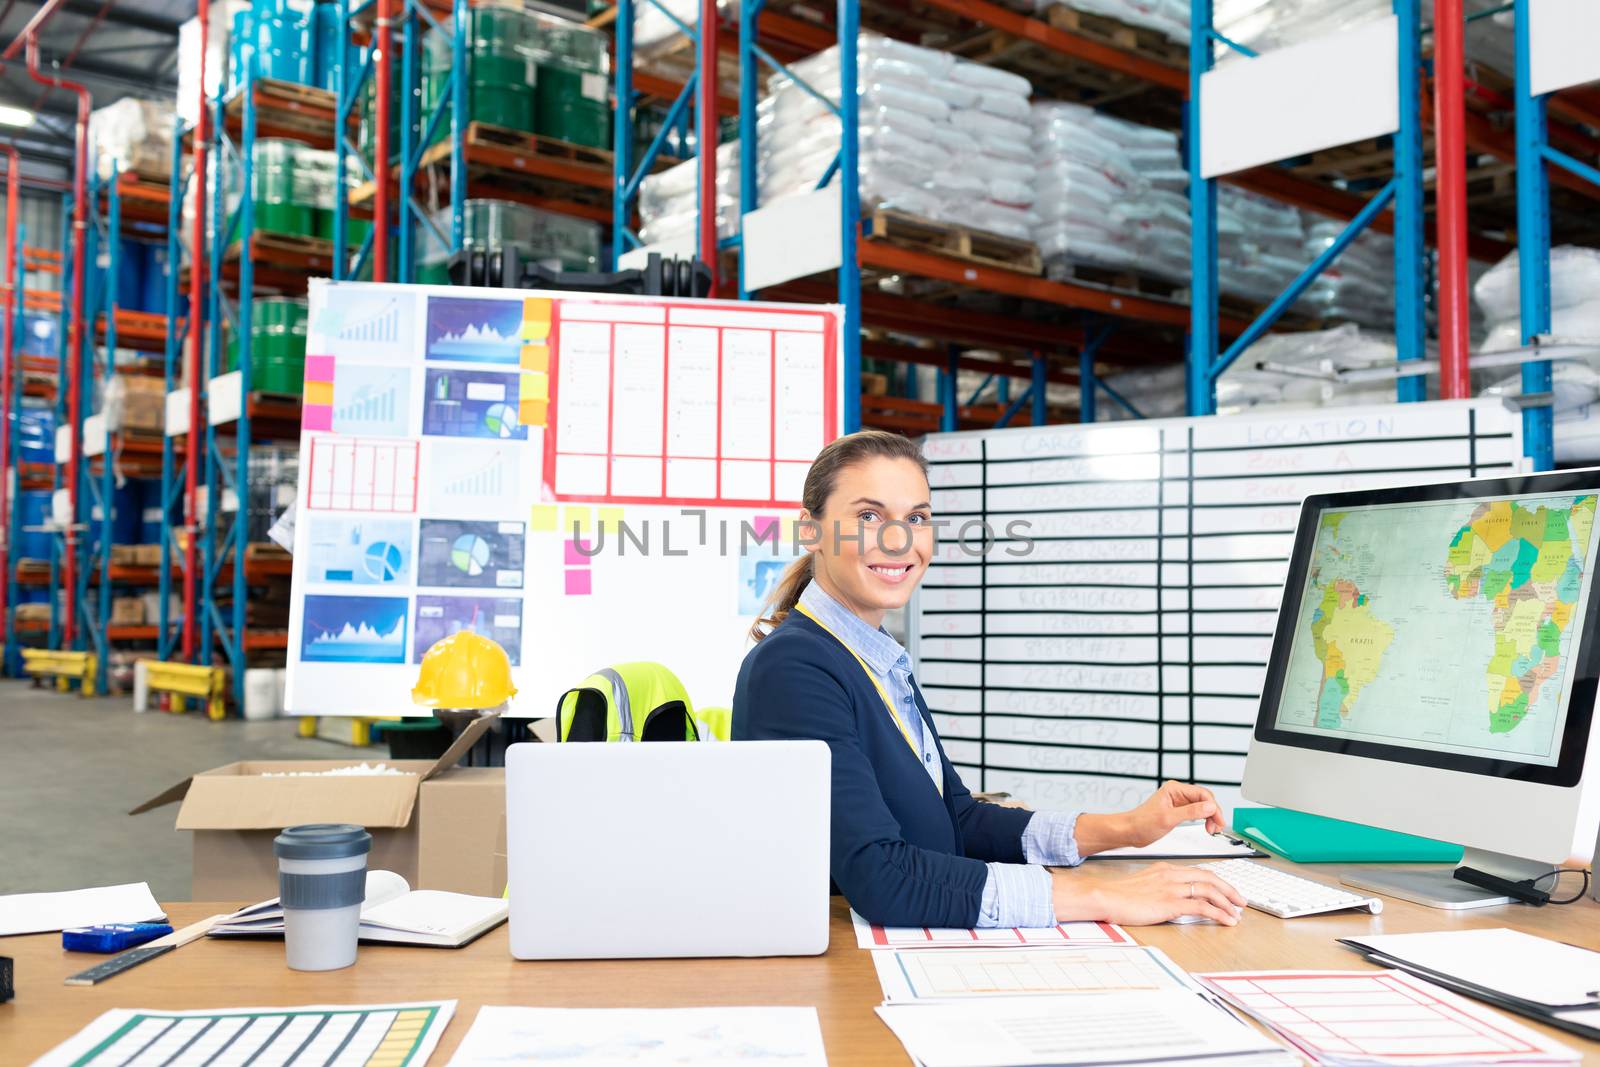 Portrait of beautiful Caucasian female manager working on computer at desk in warehouse. This is a freight transportation and distribution warehouse. Industrial and industrial workers concept